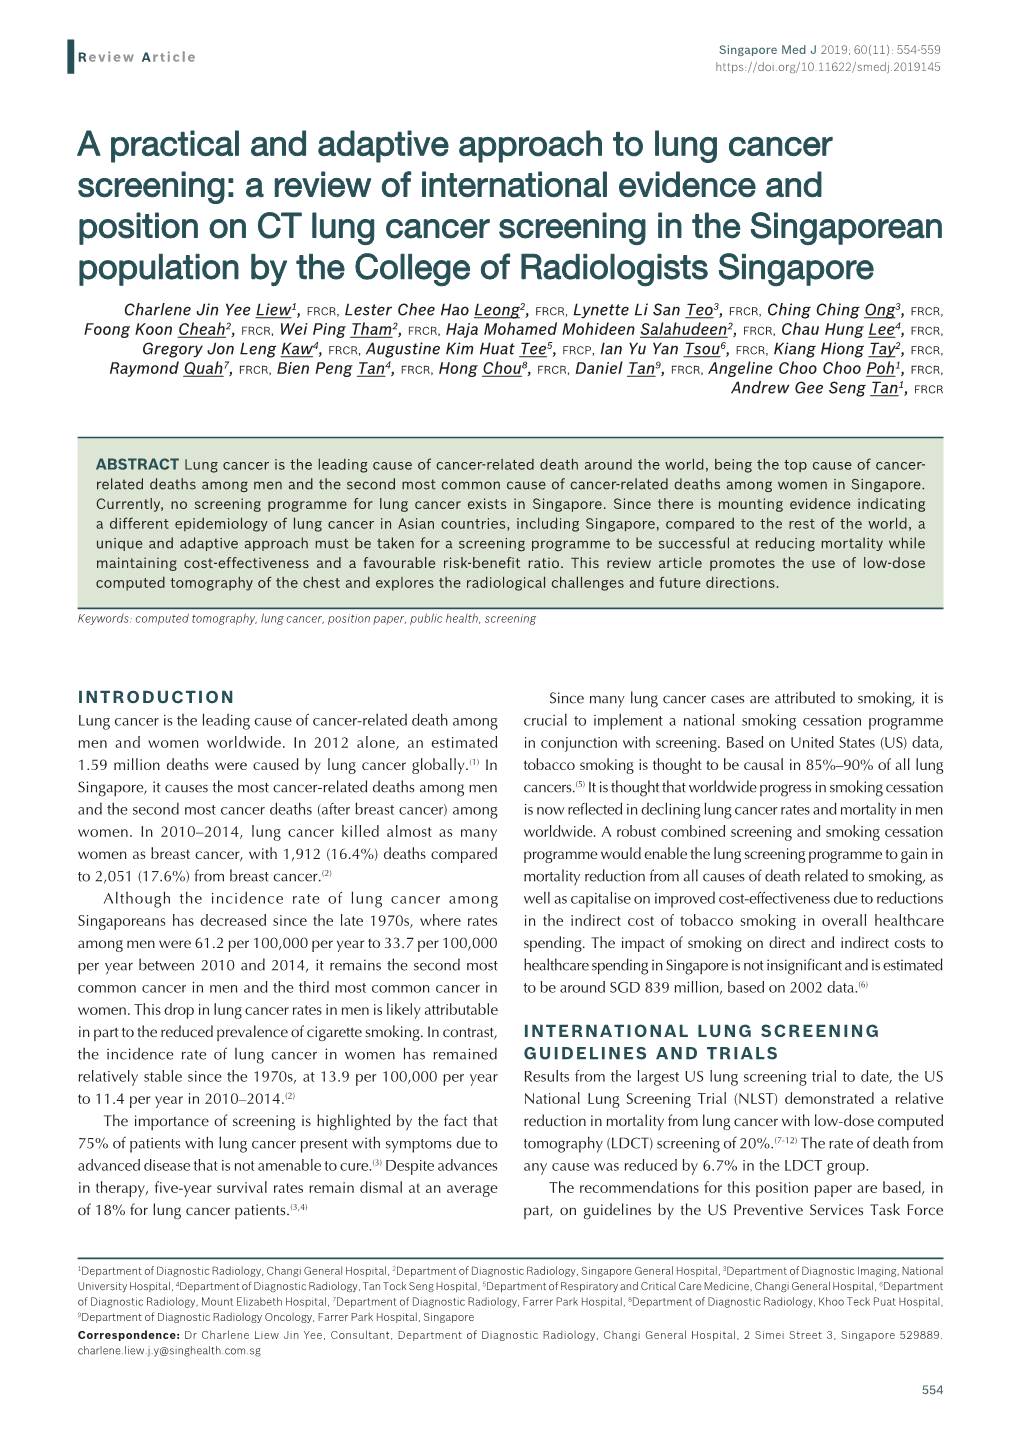 A Review of International Evidence and Position on CT Lung Cancer Screening in the Singaporean Population by the College of Radiologists Singapore